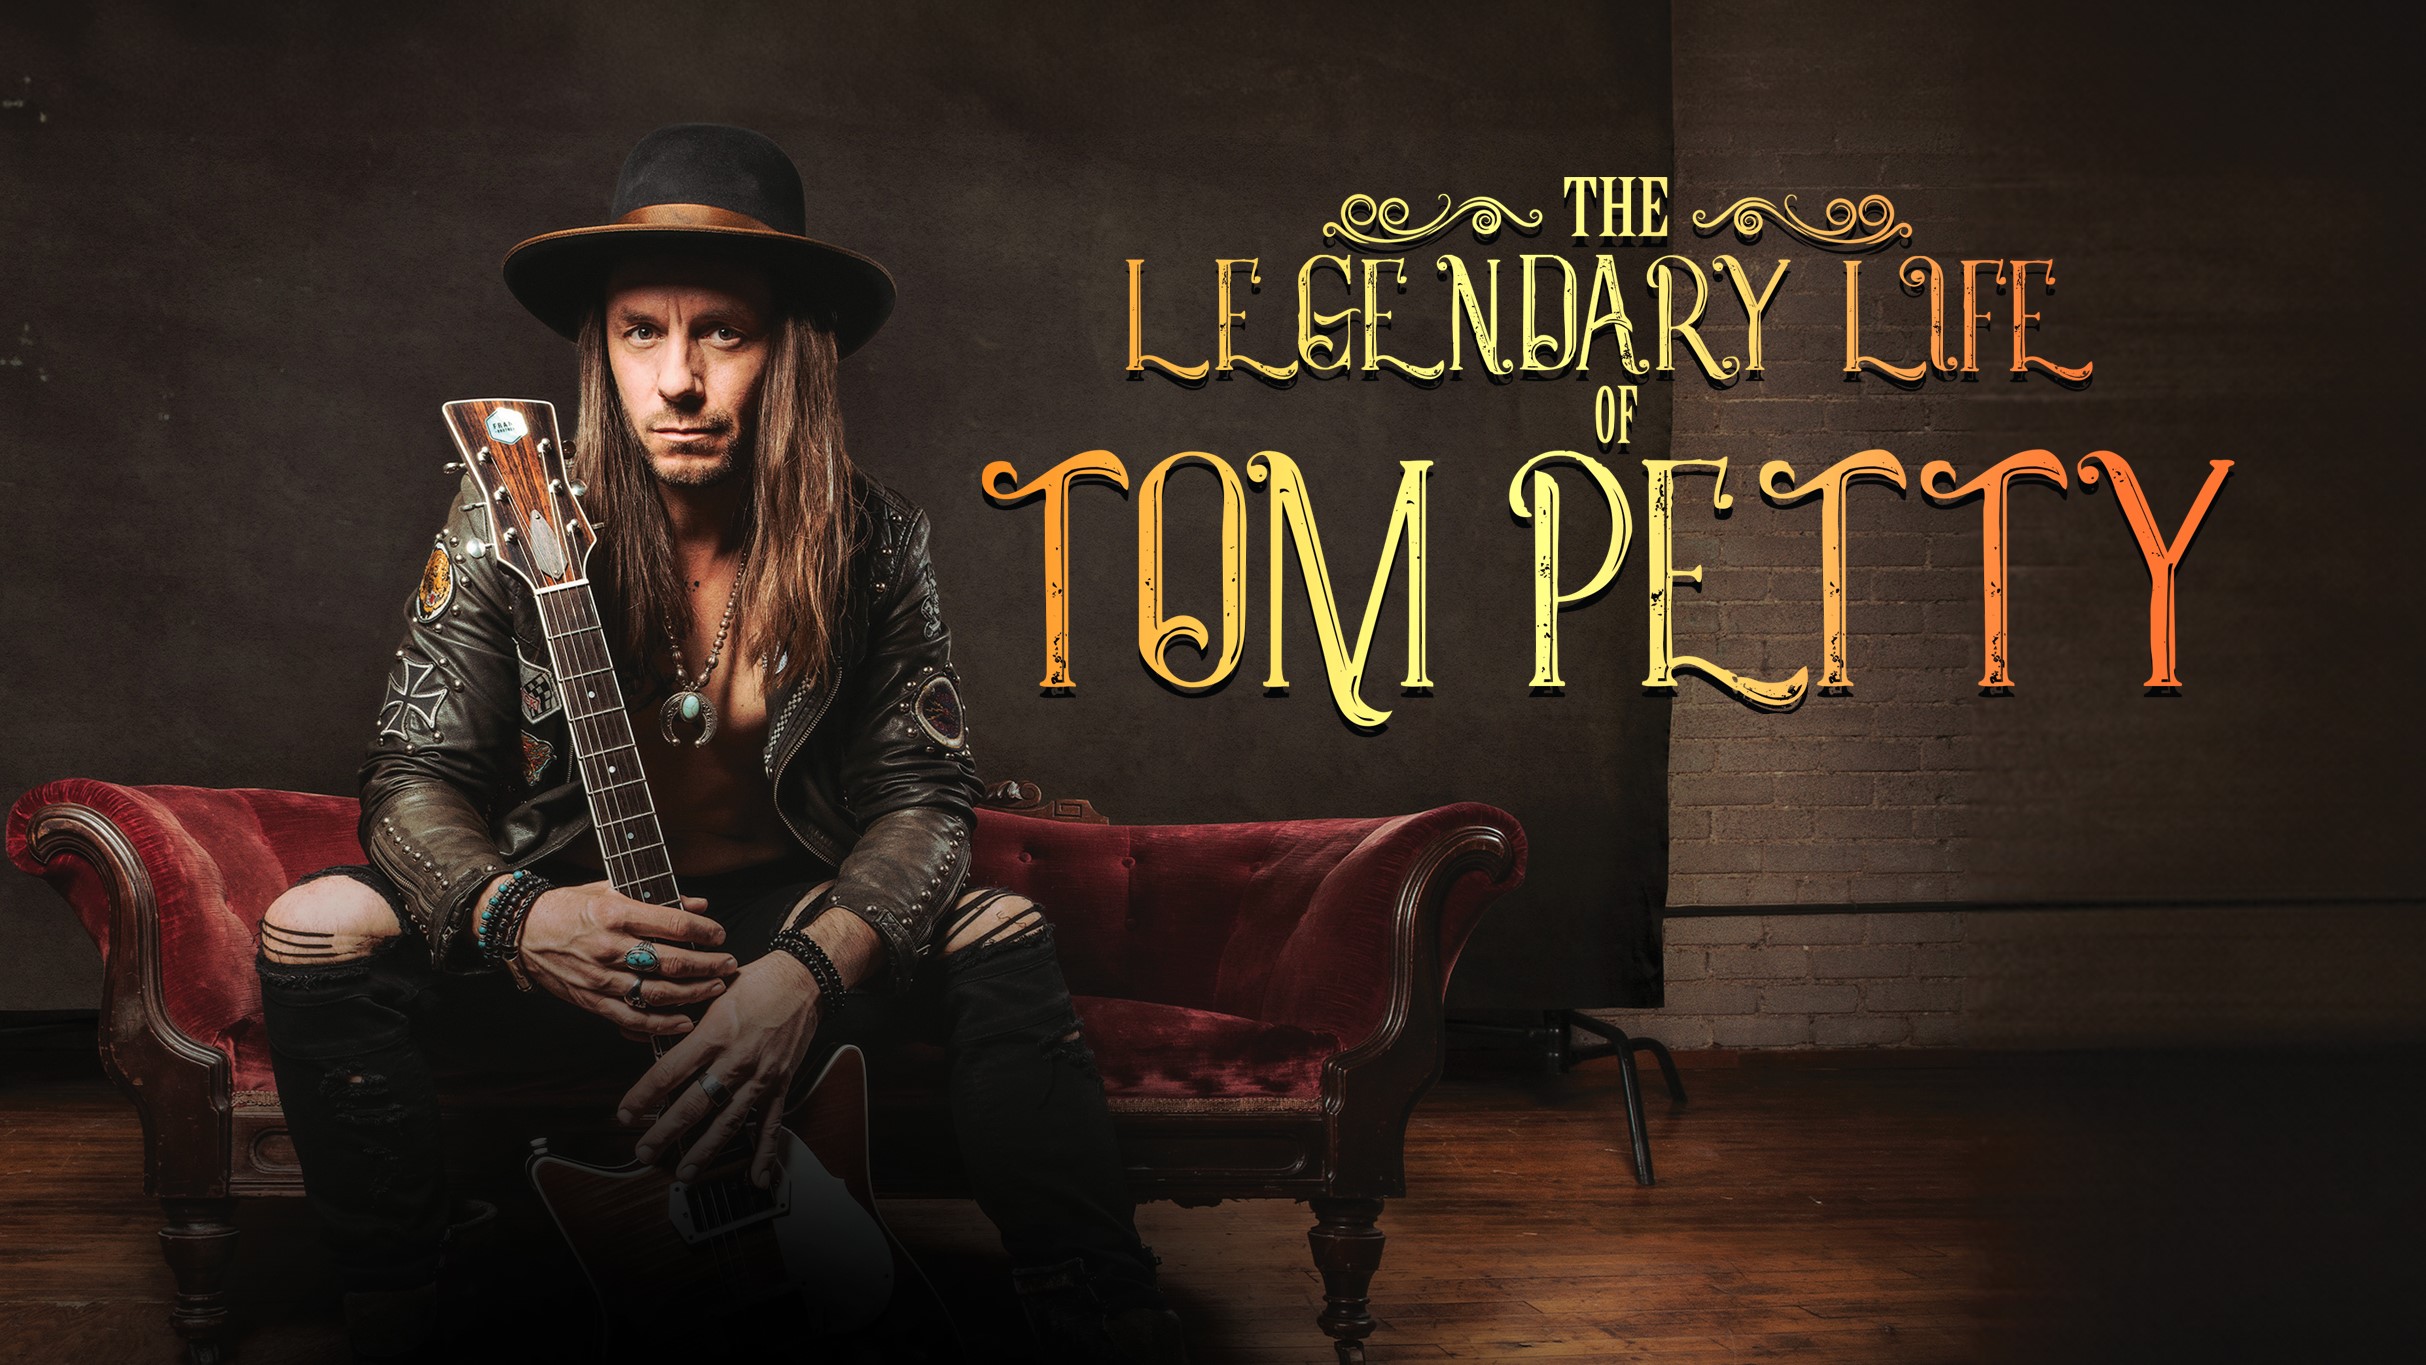 The Legendary Life of Tom Petty featuring Clayton Bellamy